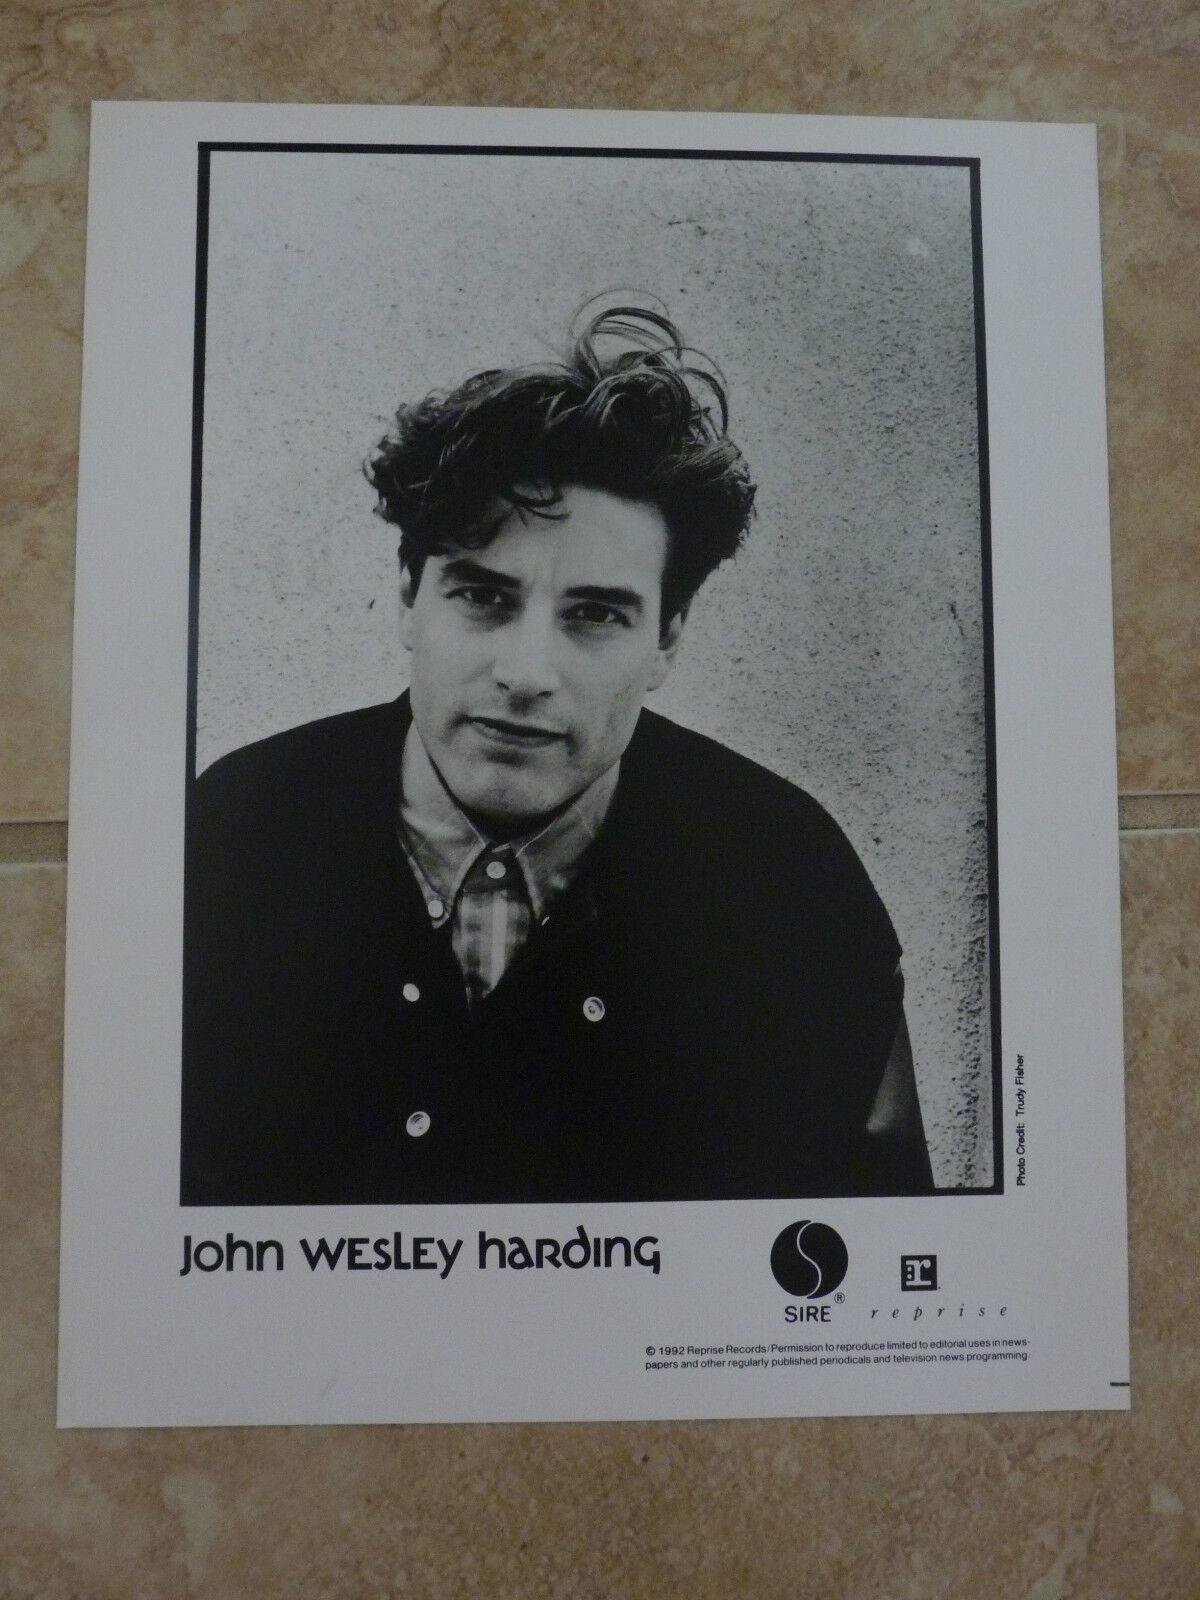 John Wesley Harding 1989 90's 8x10 B&W Publicity Picture Promo Photo Poster painting #2